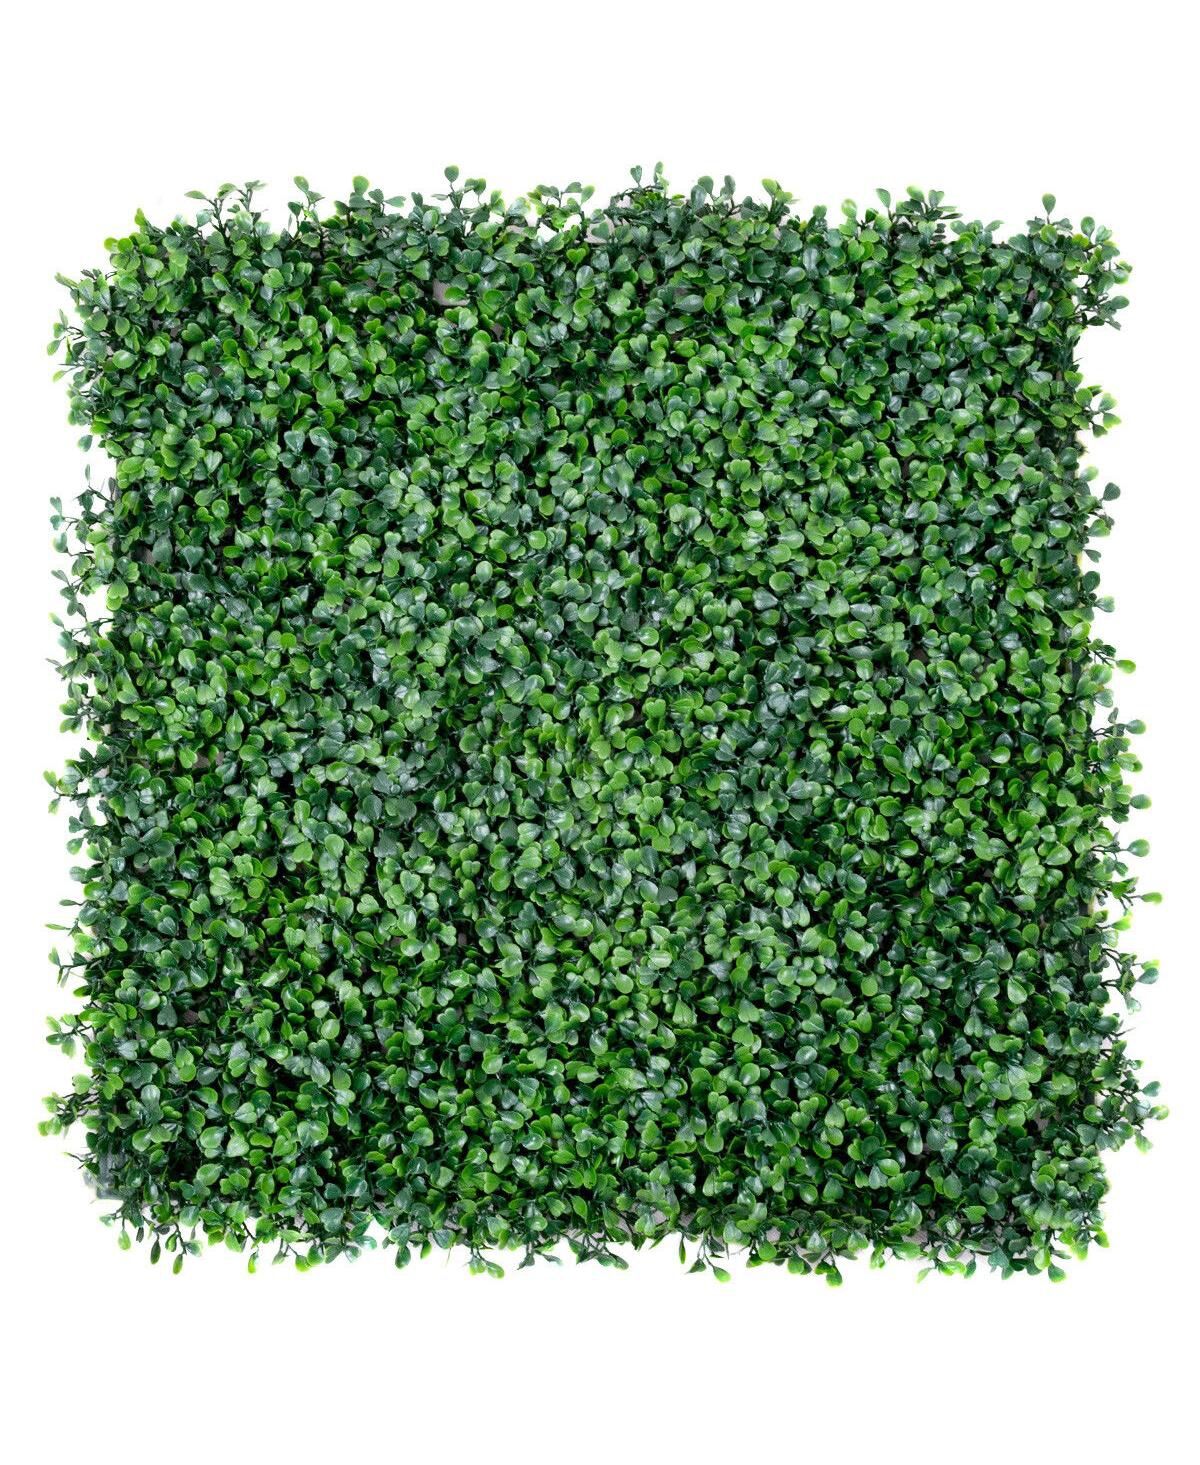 Costway 12 Artificial Hedge Plant Privacy Fence Screen Topiary Decorative Wall 20'' x 20'' - Green